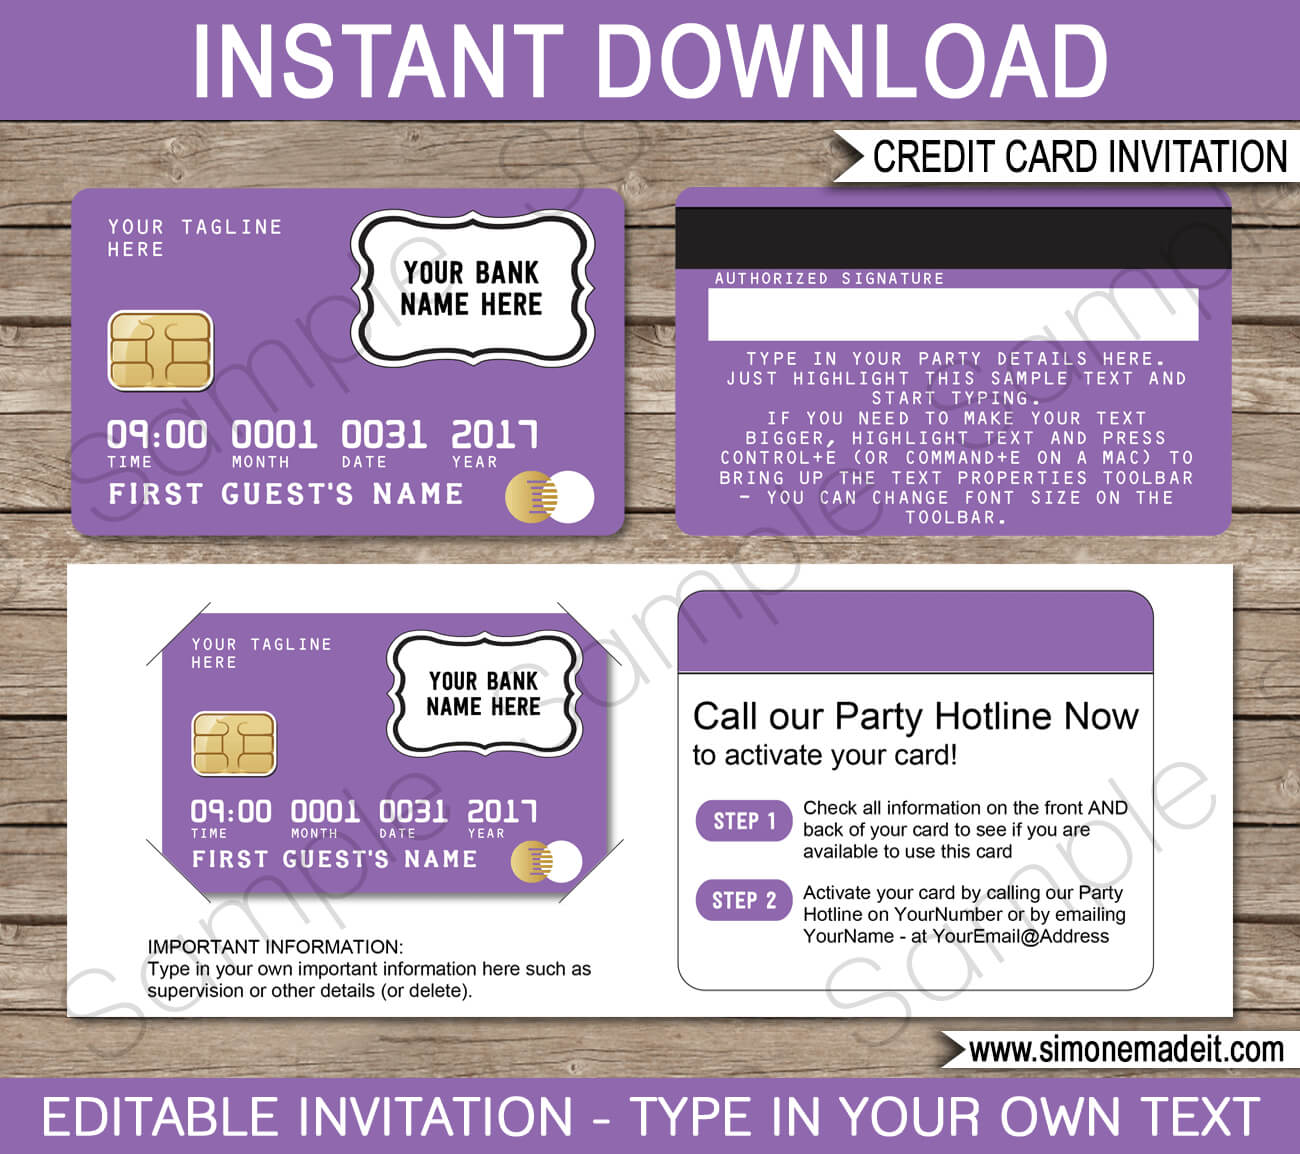 Credit Card Invitation | Mall Scavenger Hunt Invitations For Credit Card Template For Kids